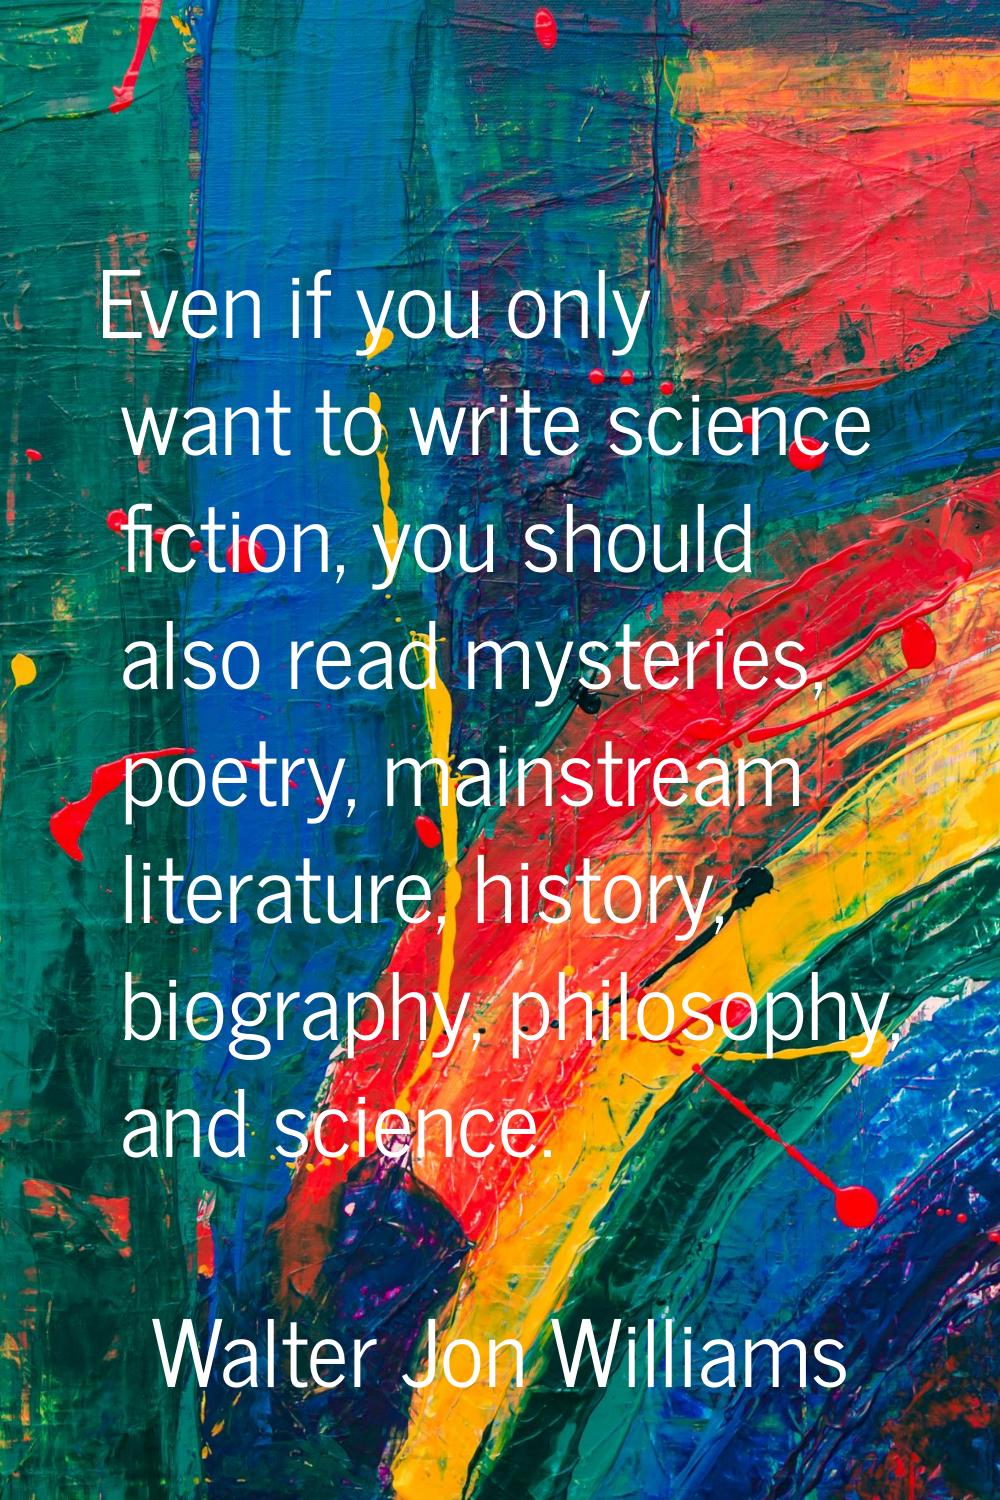 Even if you only want to write science fiction, you should also read mysteries, poetry, mainstream 